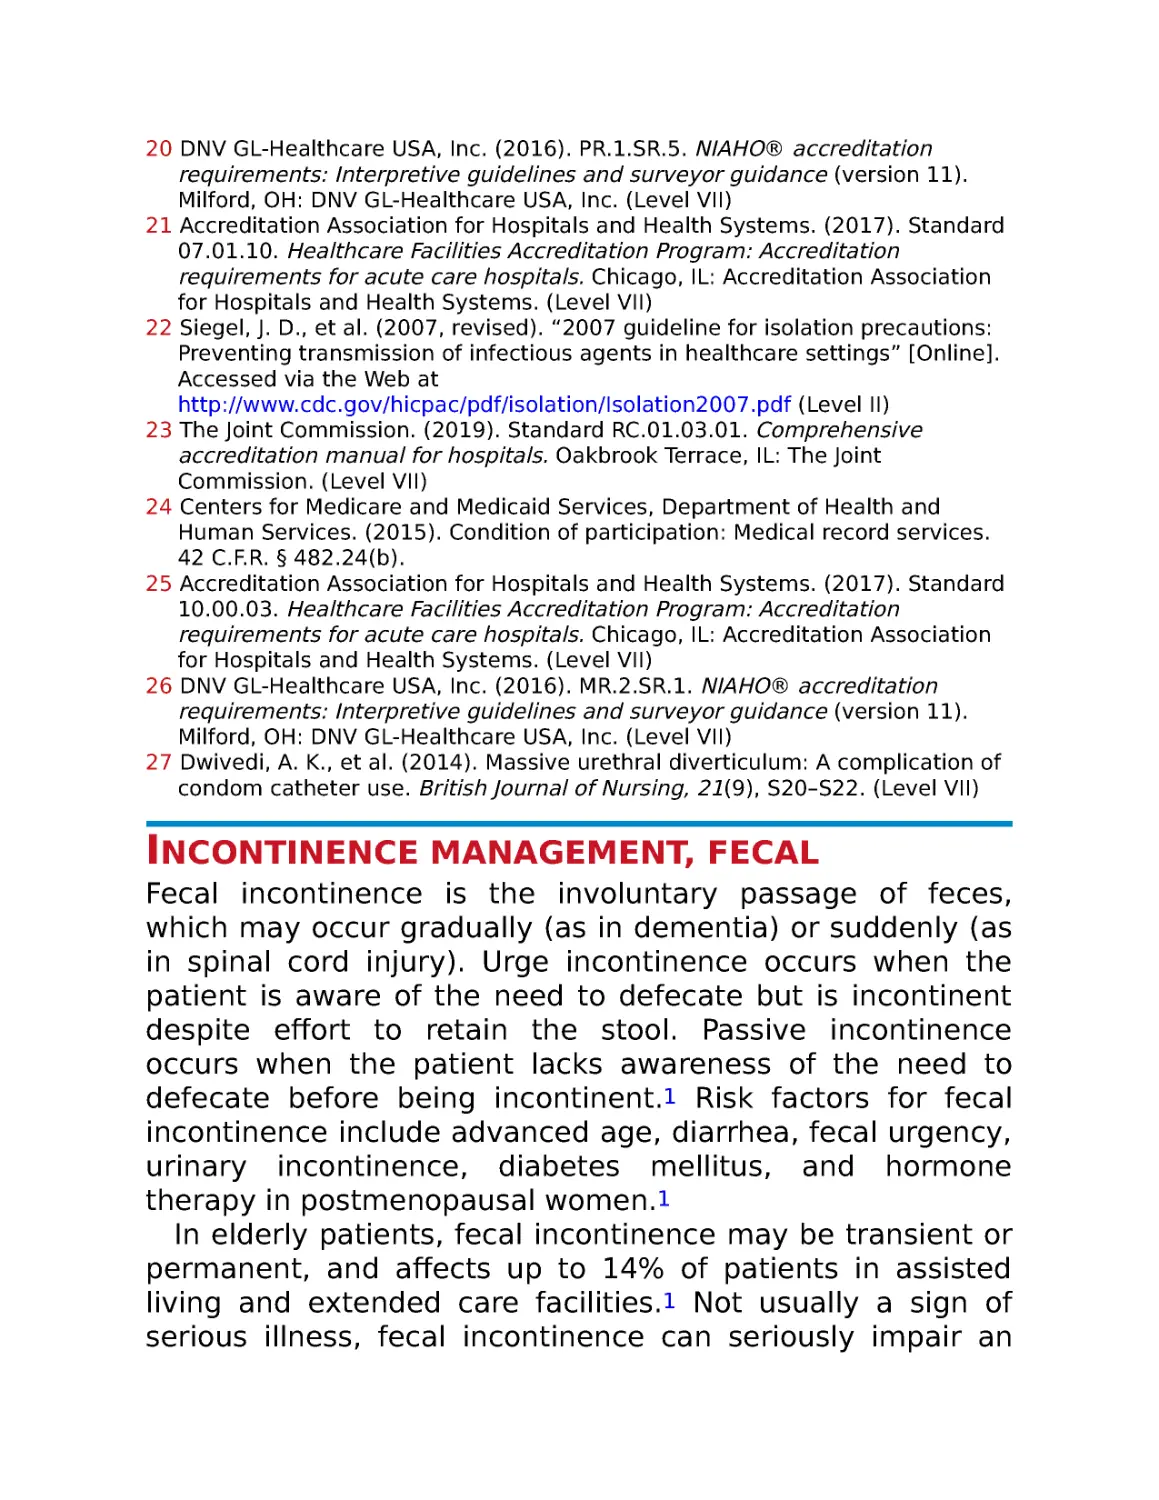 Incontinence management, fecal